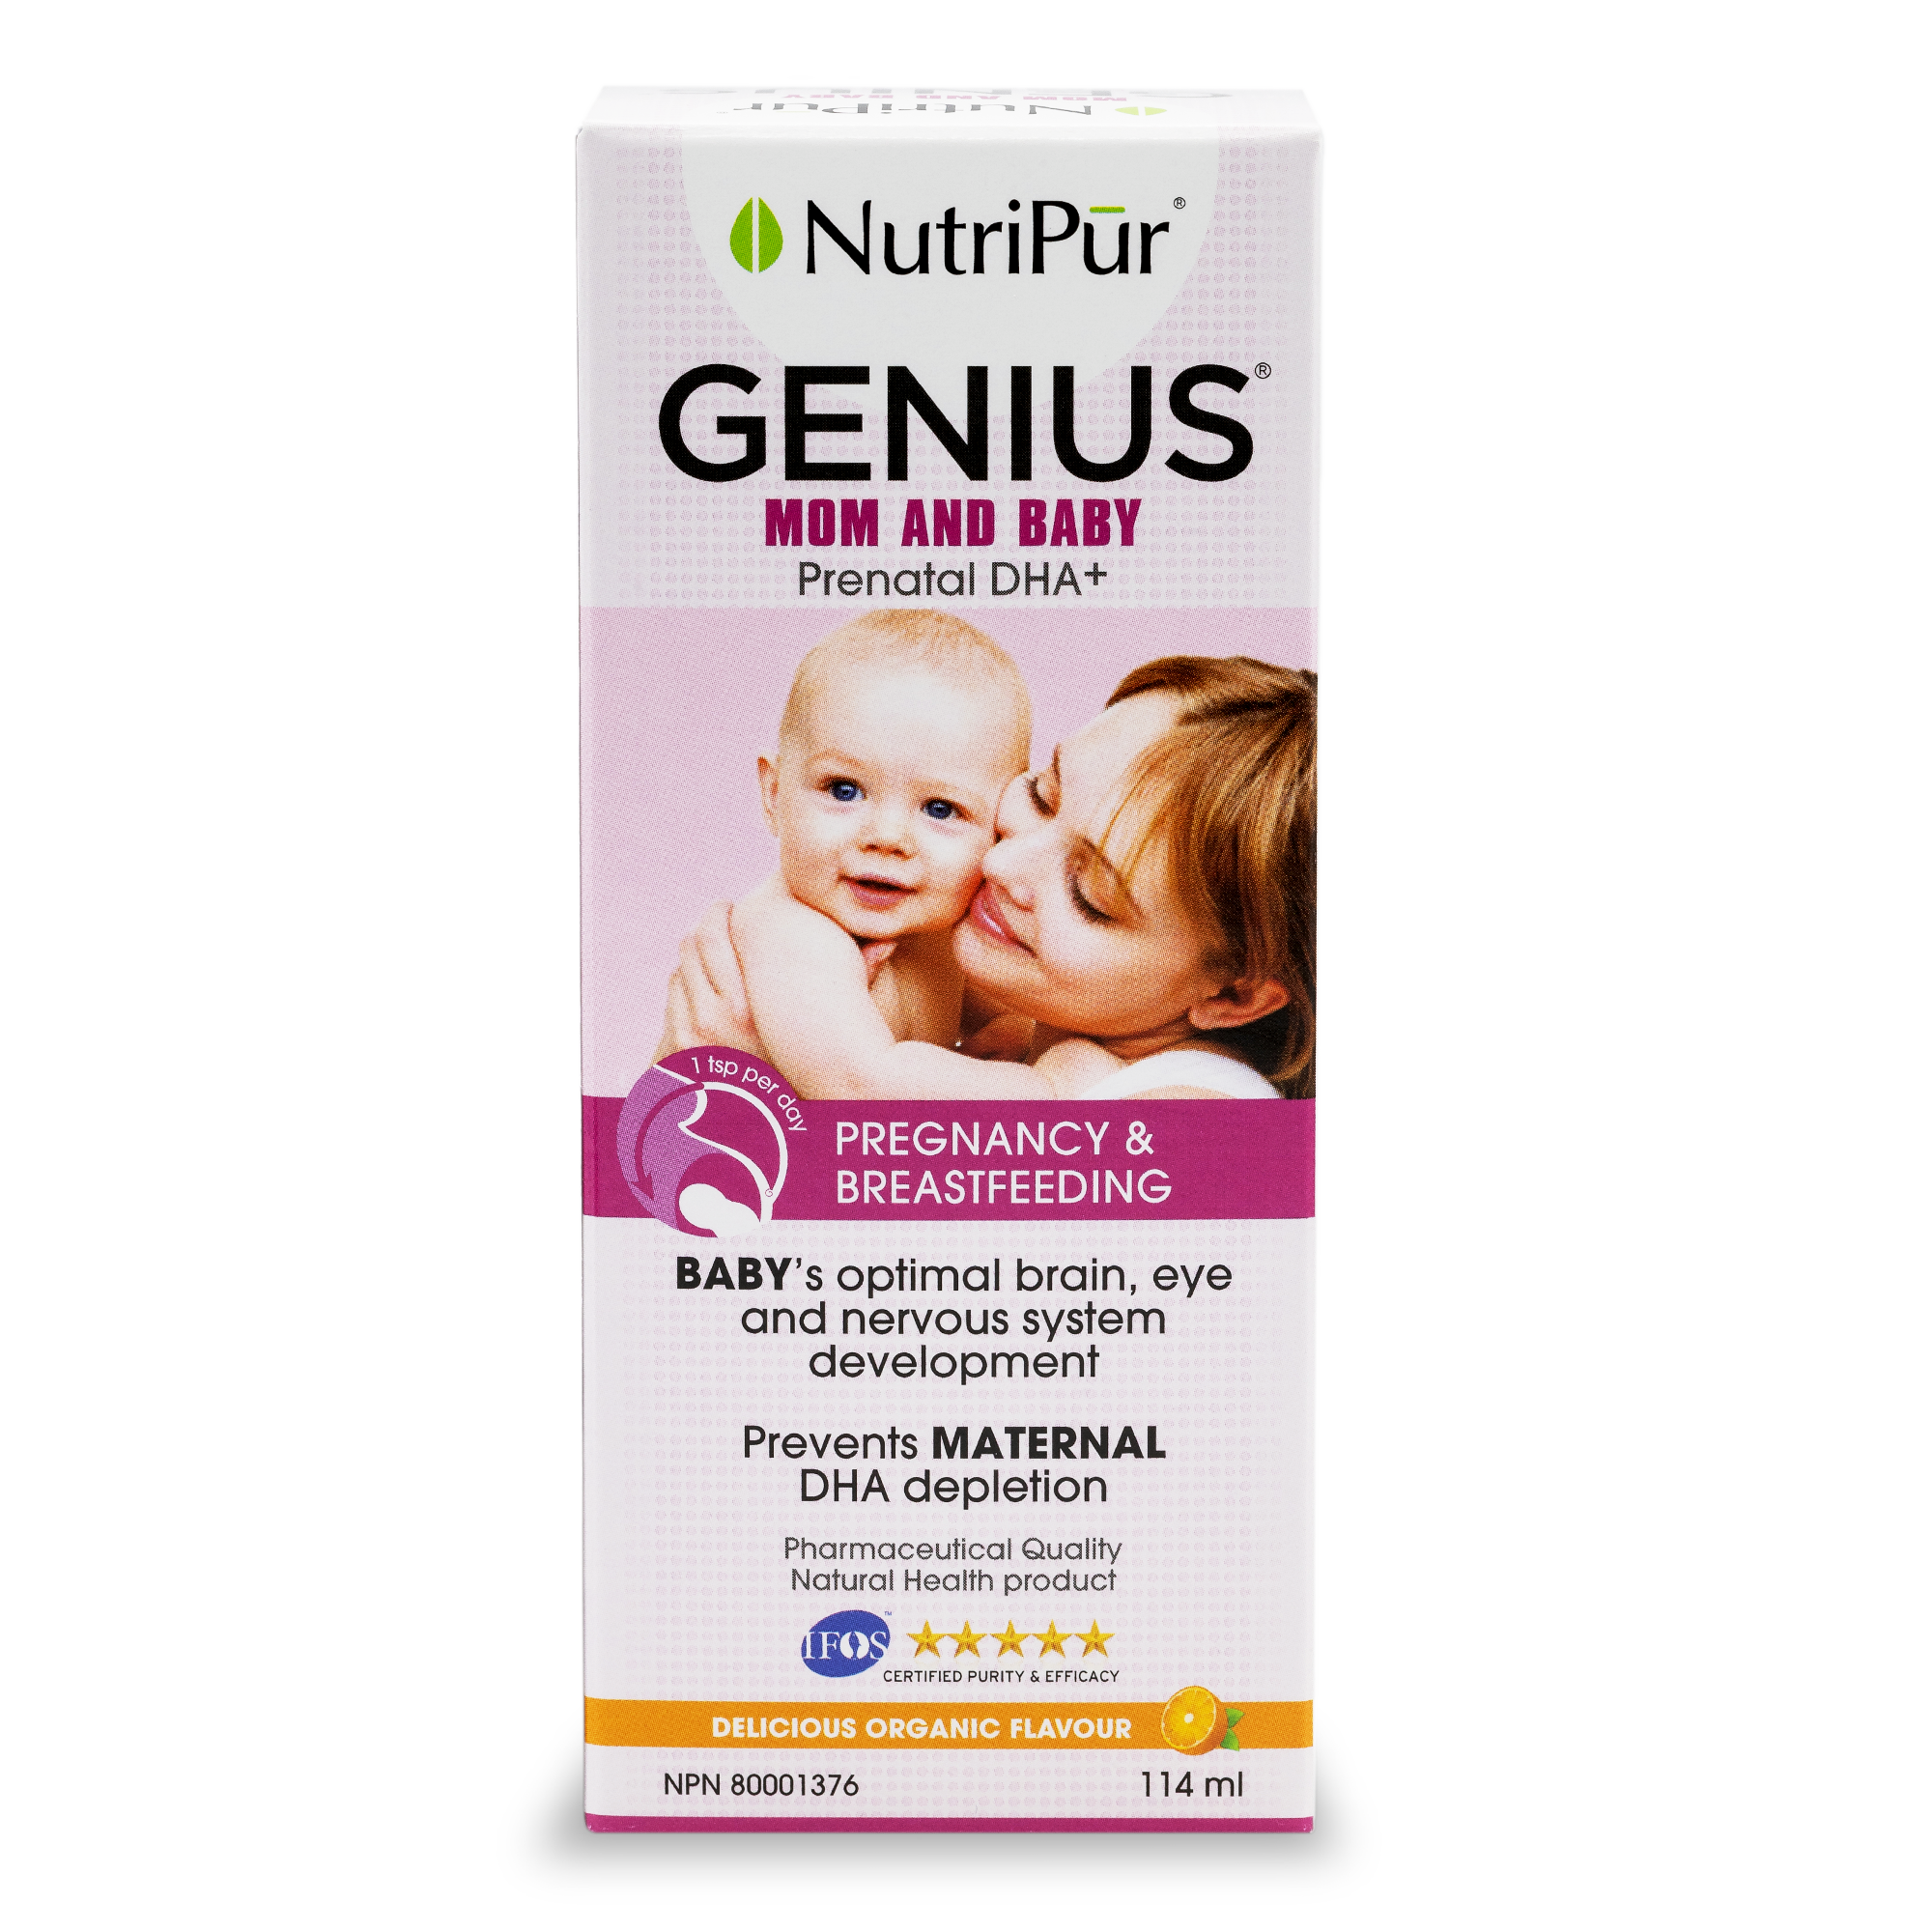 Genius Mom and Baby - Nutripur - pregancy and breastfeeding - prevents ADD/ADH in children - and maternal DHA depletion to prevent post-partrum